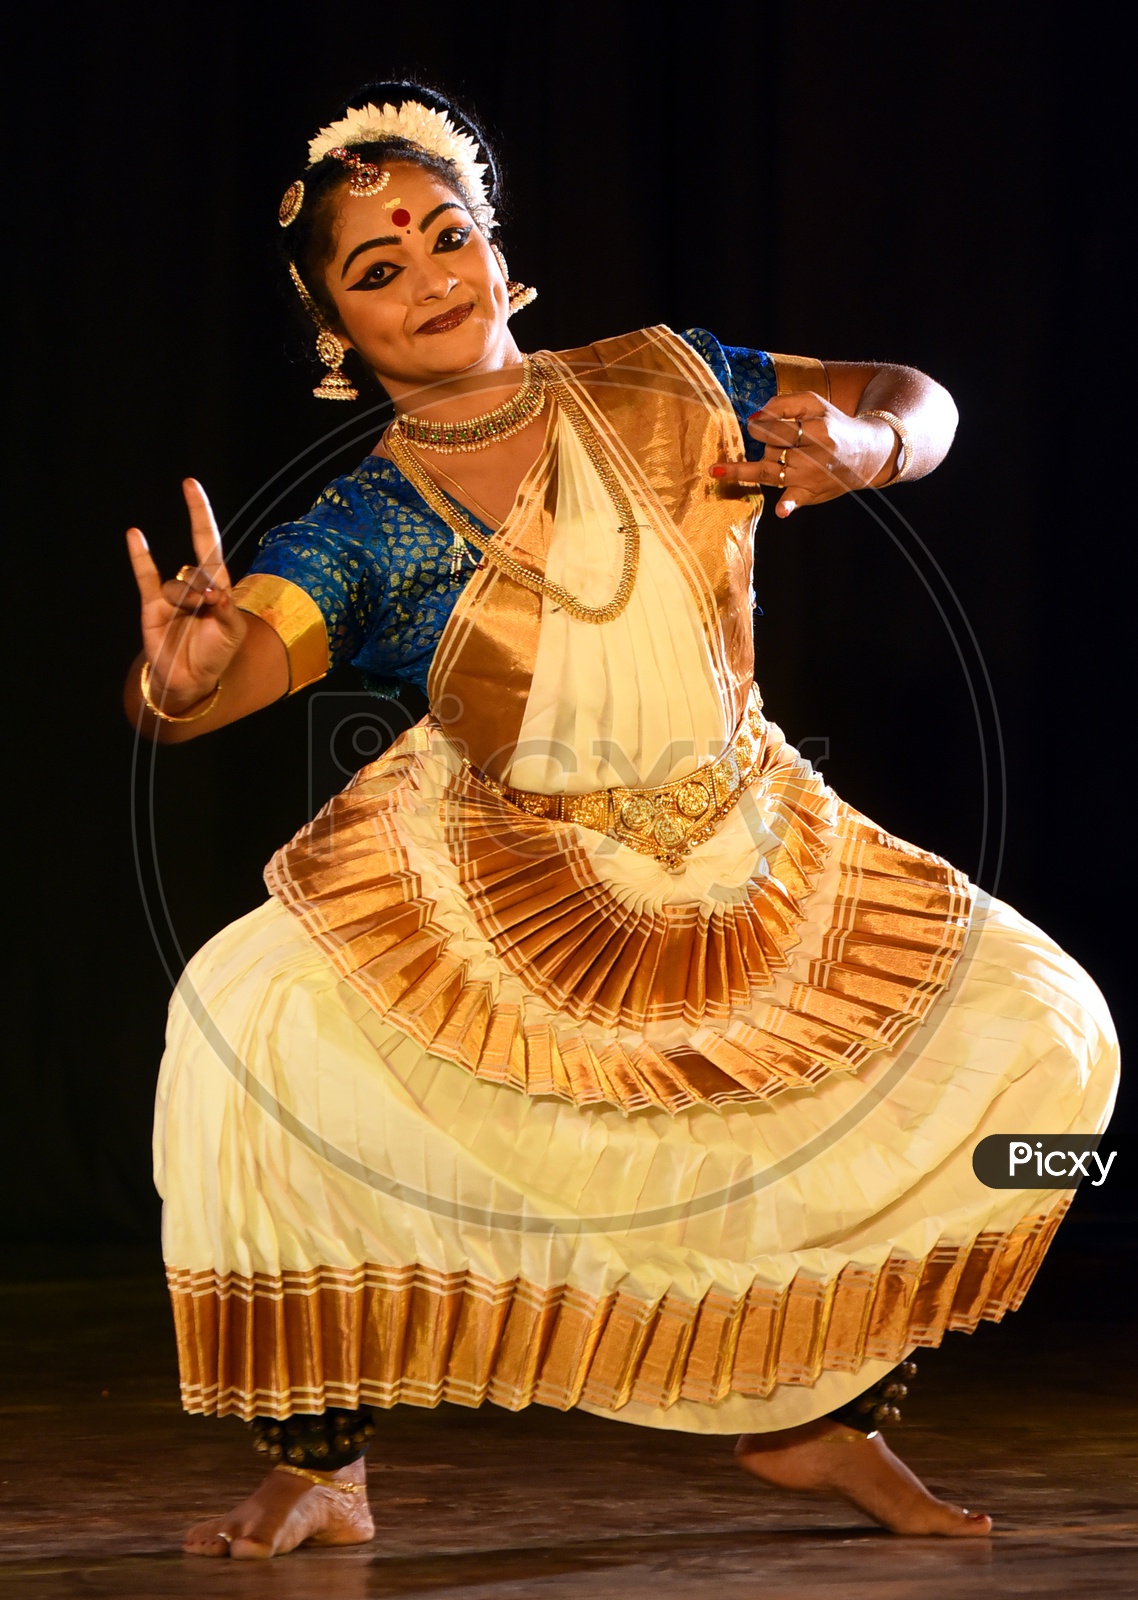 Indian Classical dancer performing on stage